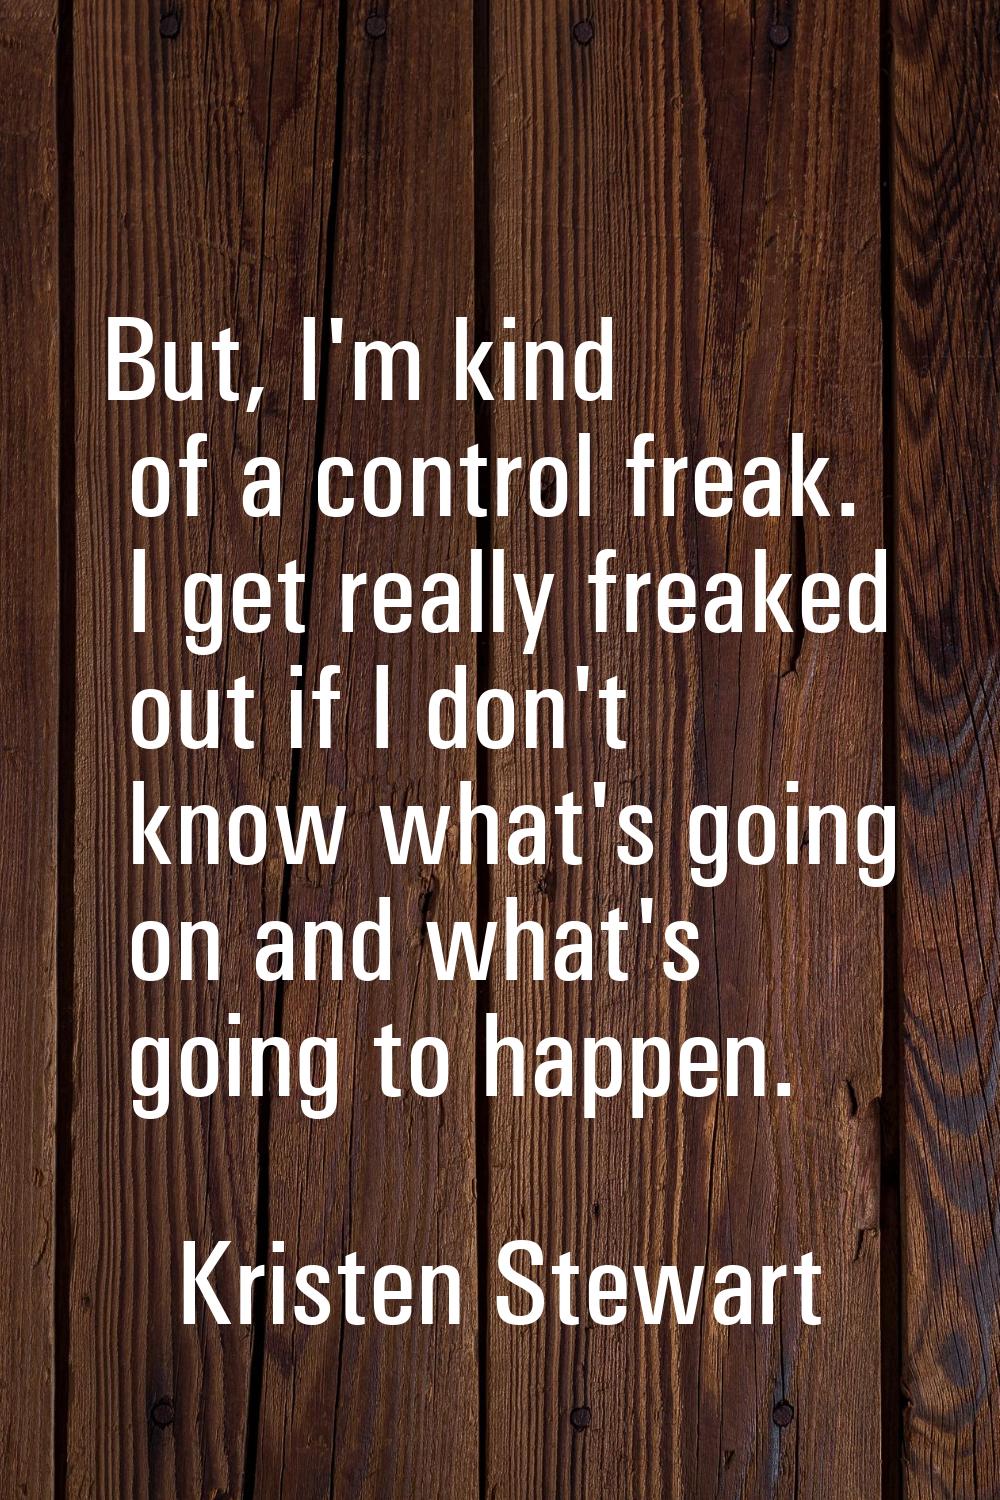 But, I'm kind of a control freak. I get really freaked out if I don't know what's going on and what